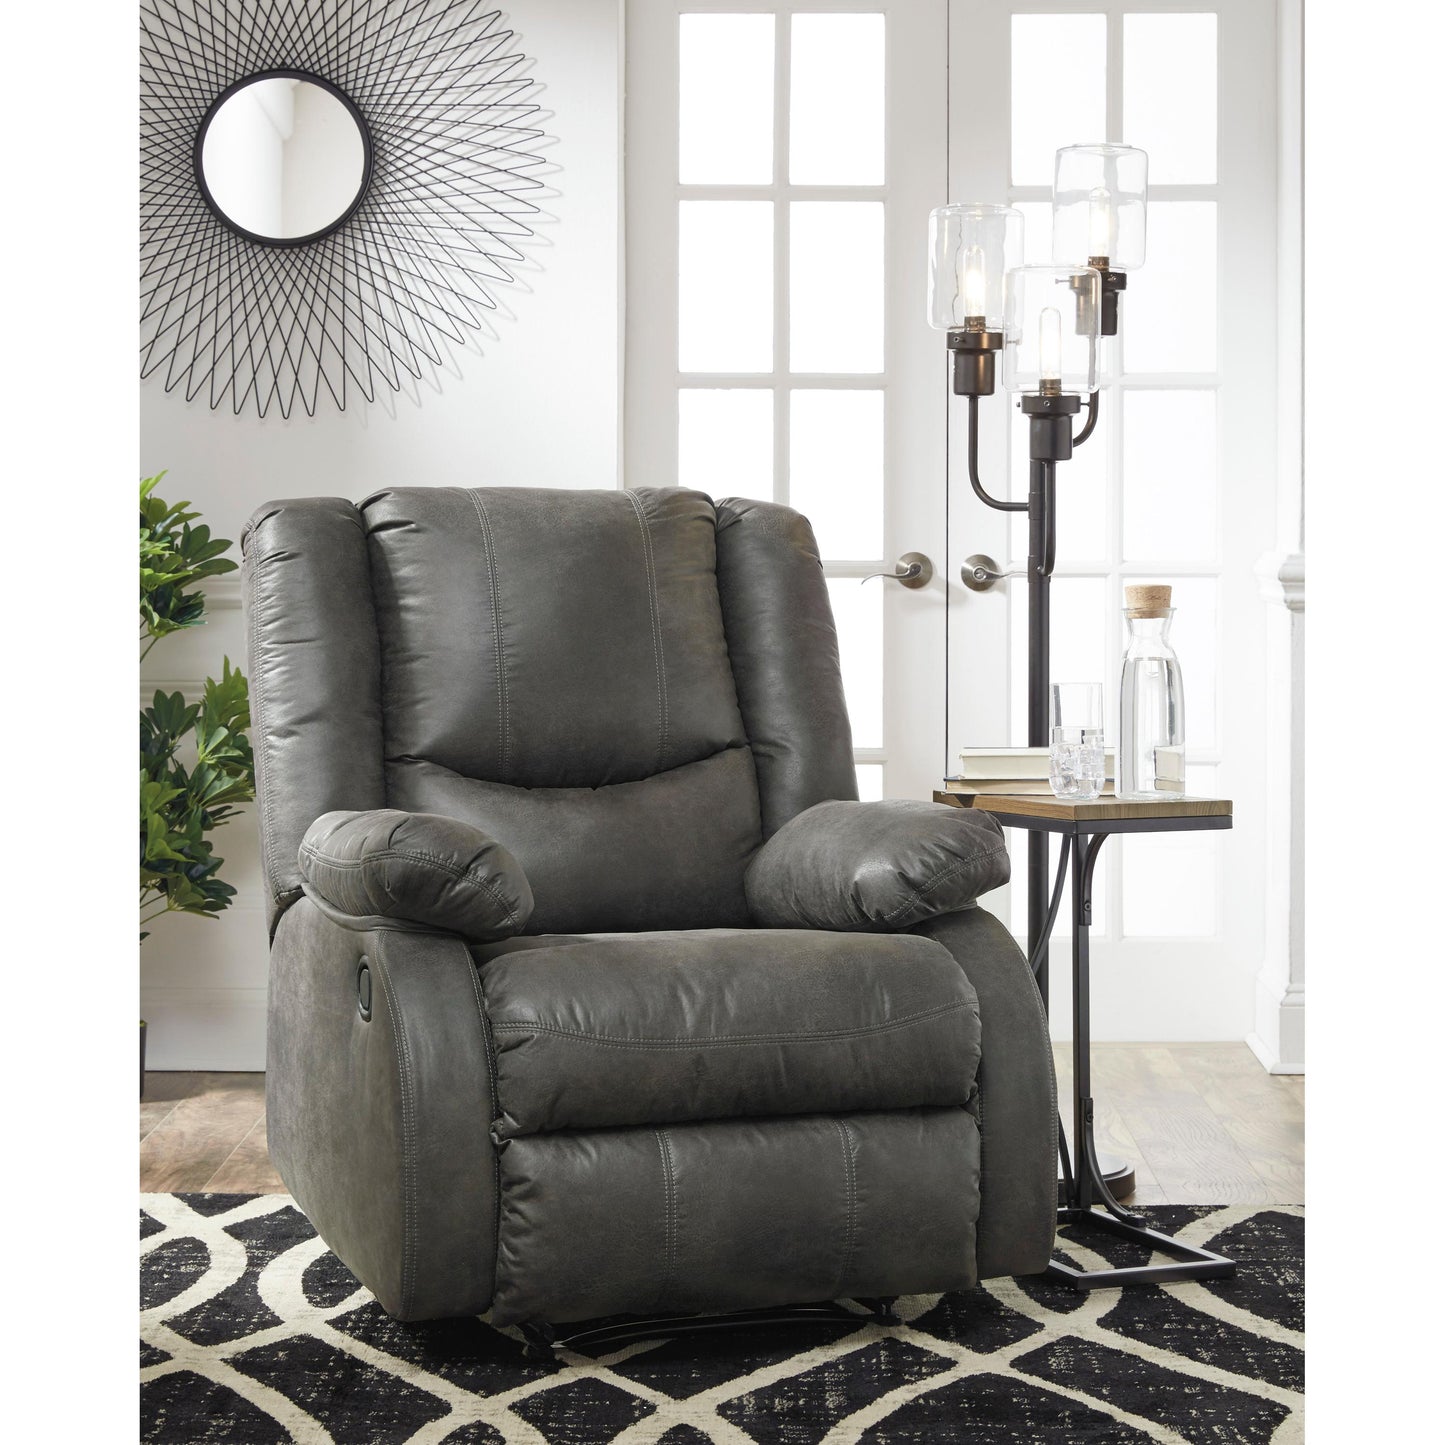 Signature Design by Ashley Bladewood Leather Look Recliner with Wall Recline 6030629 IMAGE 6